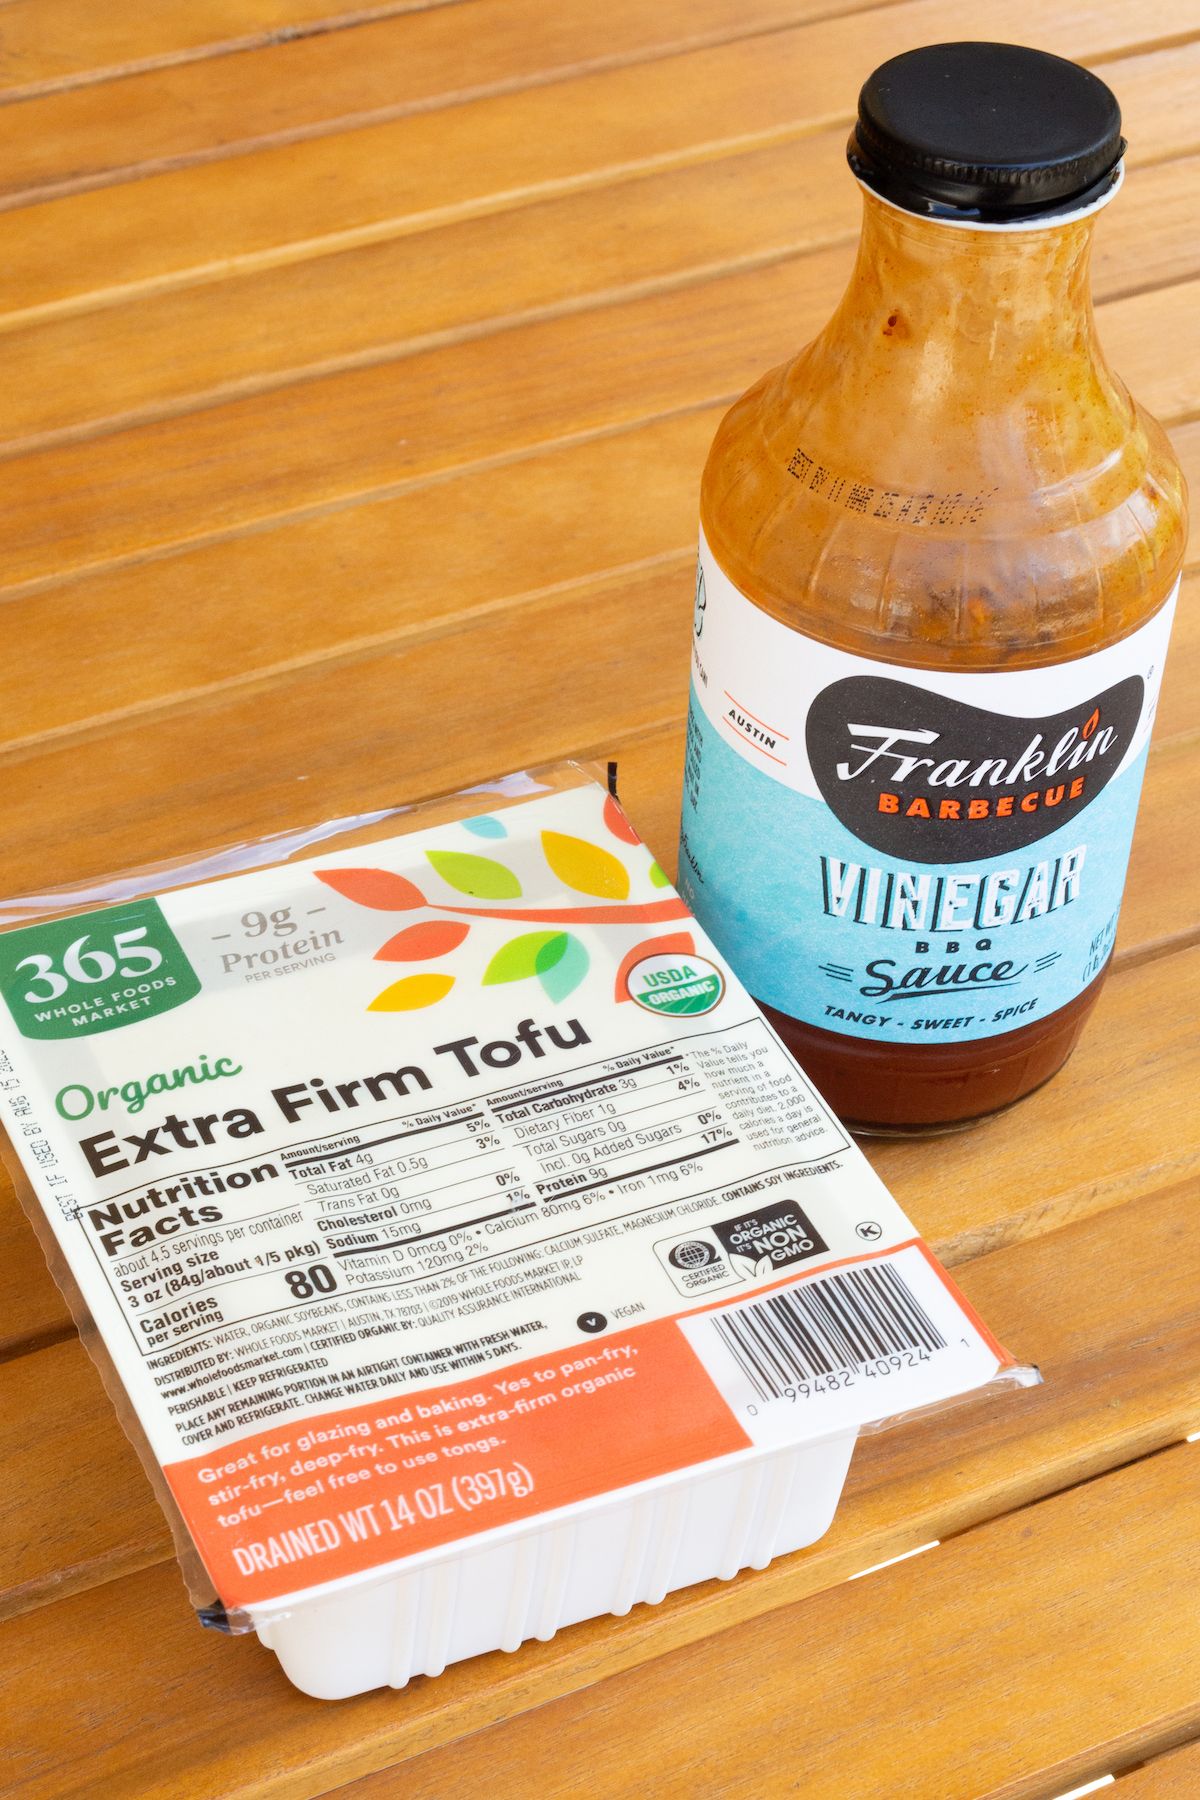 A package of extra firm tofu and a bottle of bbq sauce on a wooden outdoor table.